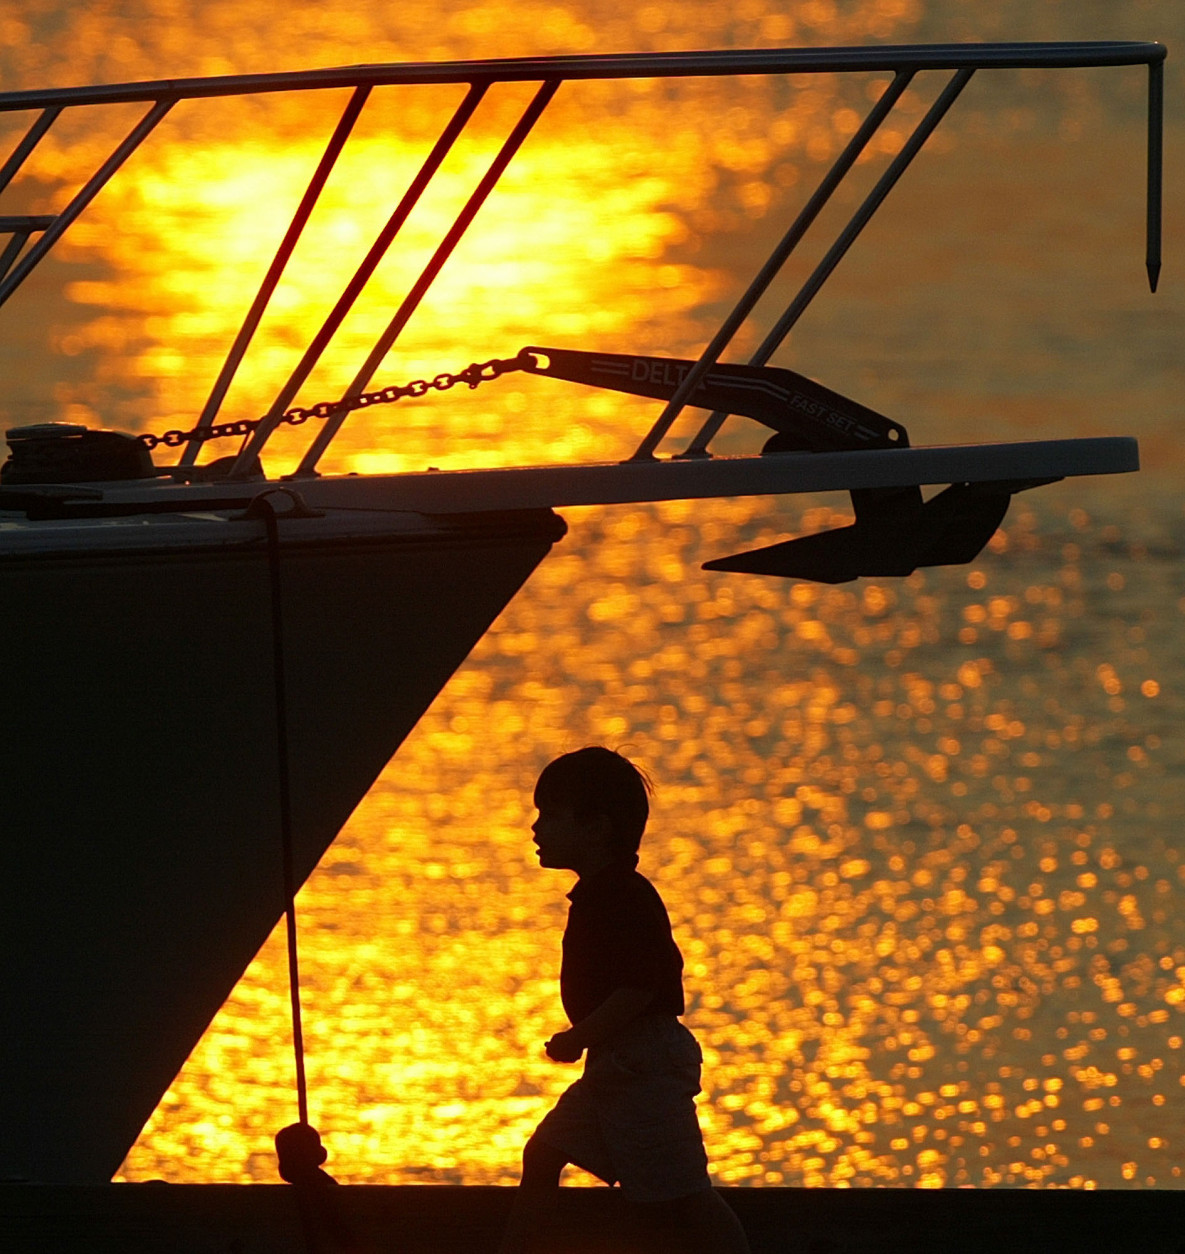 A child is silhouetted by the afternoon sun as he walks past a moored boat at an Intercoastal Waterway marina dock, Saturday, April 10, 2004, in Fernandina Beach, Fla. This area of north-east Florida is a well-know spot for viewing and photographing sunsets.(AP Photo/Phil Coale)